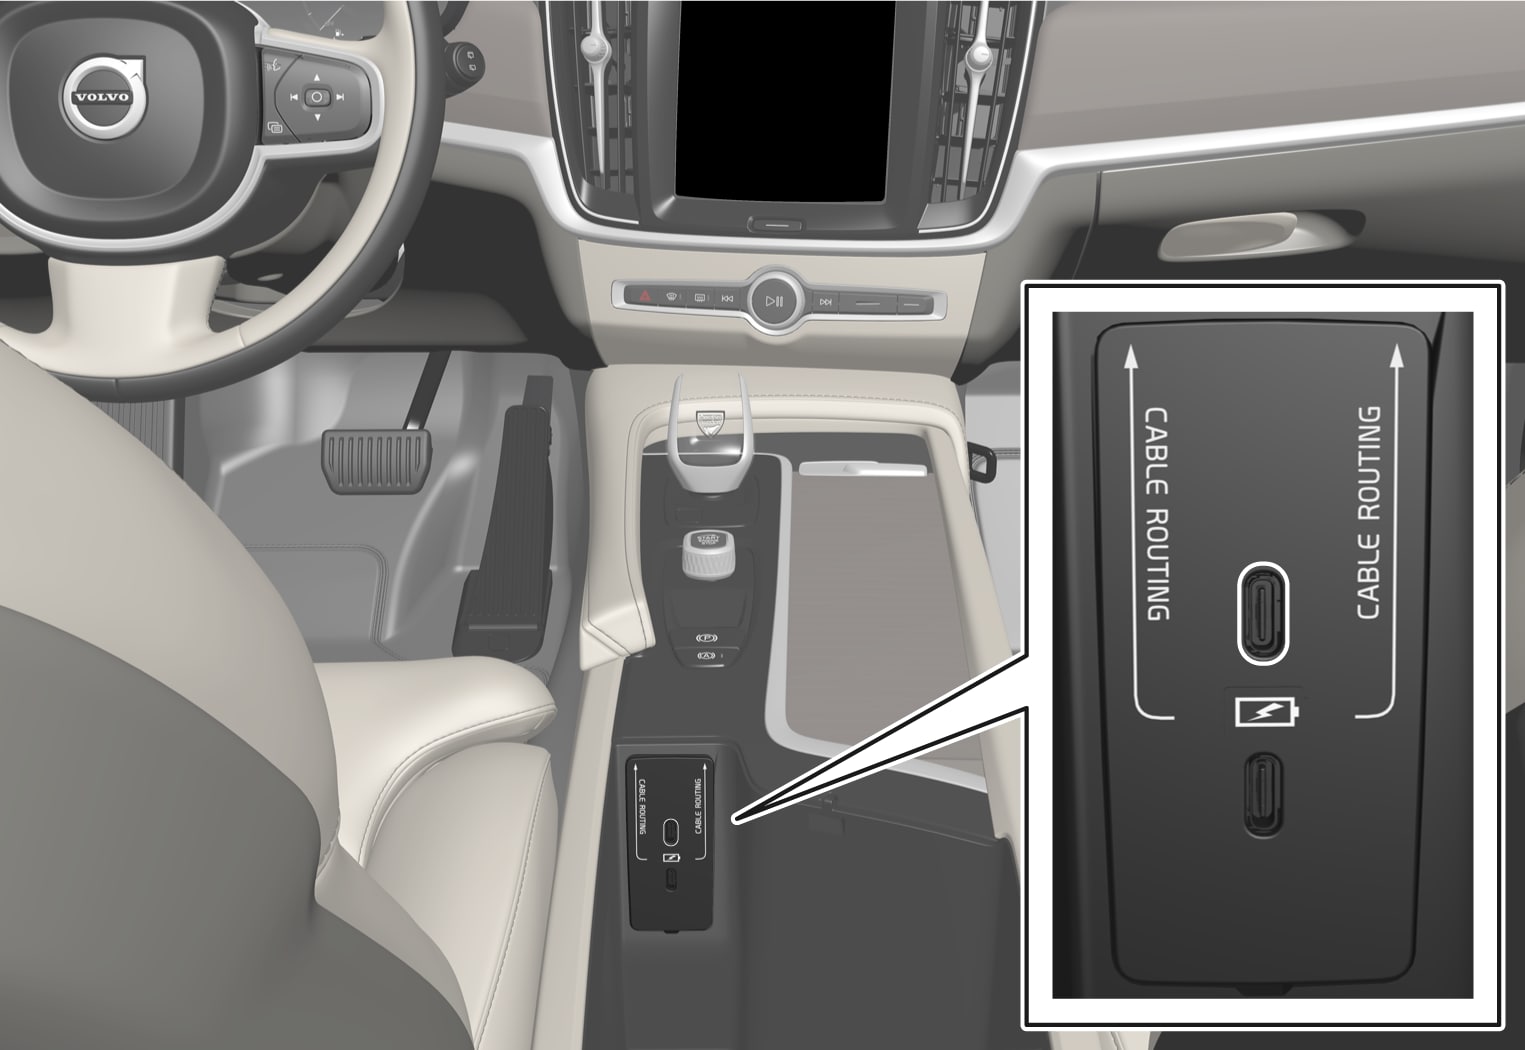 P5-iCup-2122-Overview infotainment system